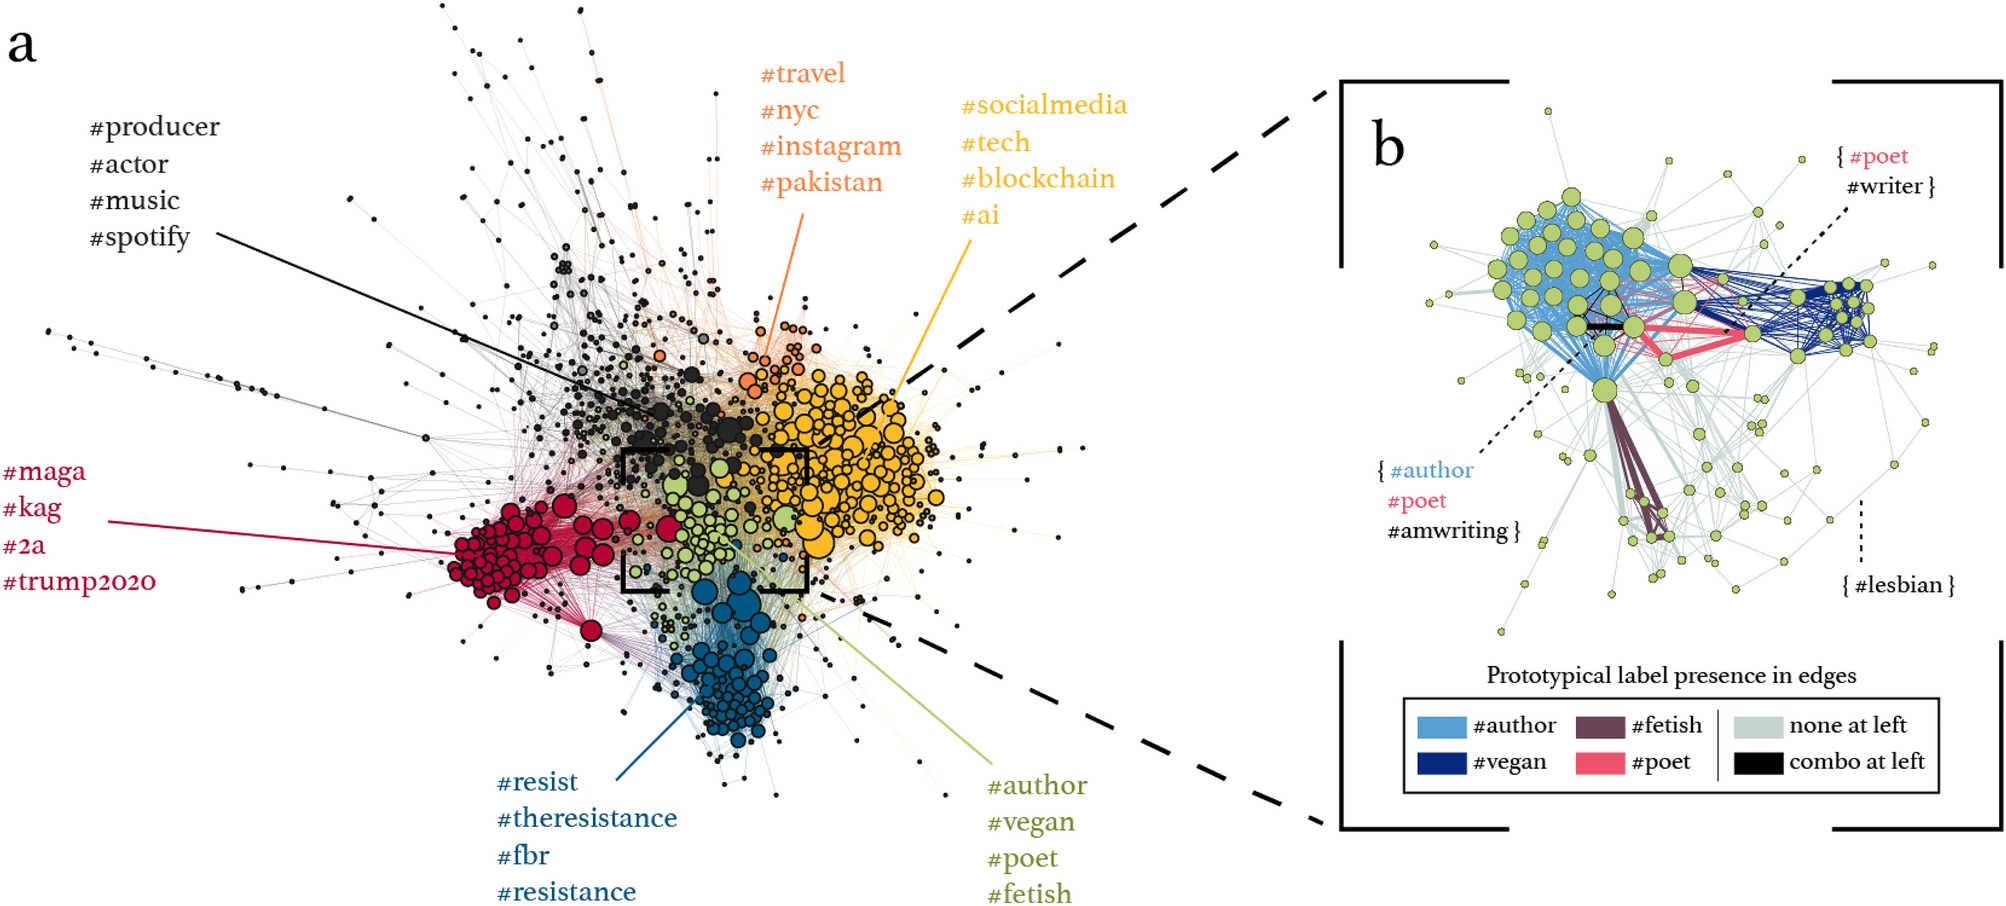 Quantifying collective identity online from self-defining hashtags |  Scientific Reports